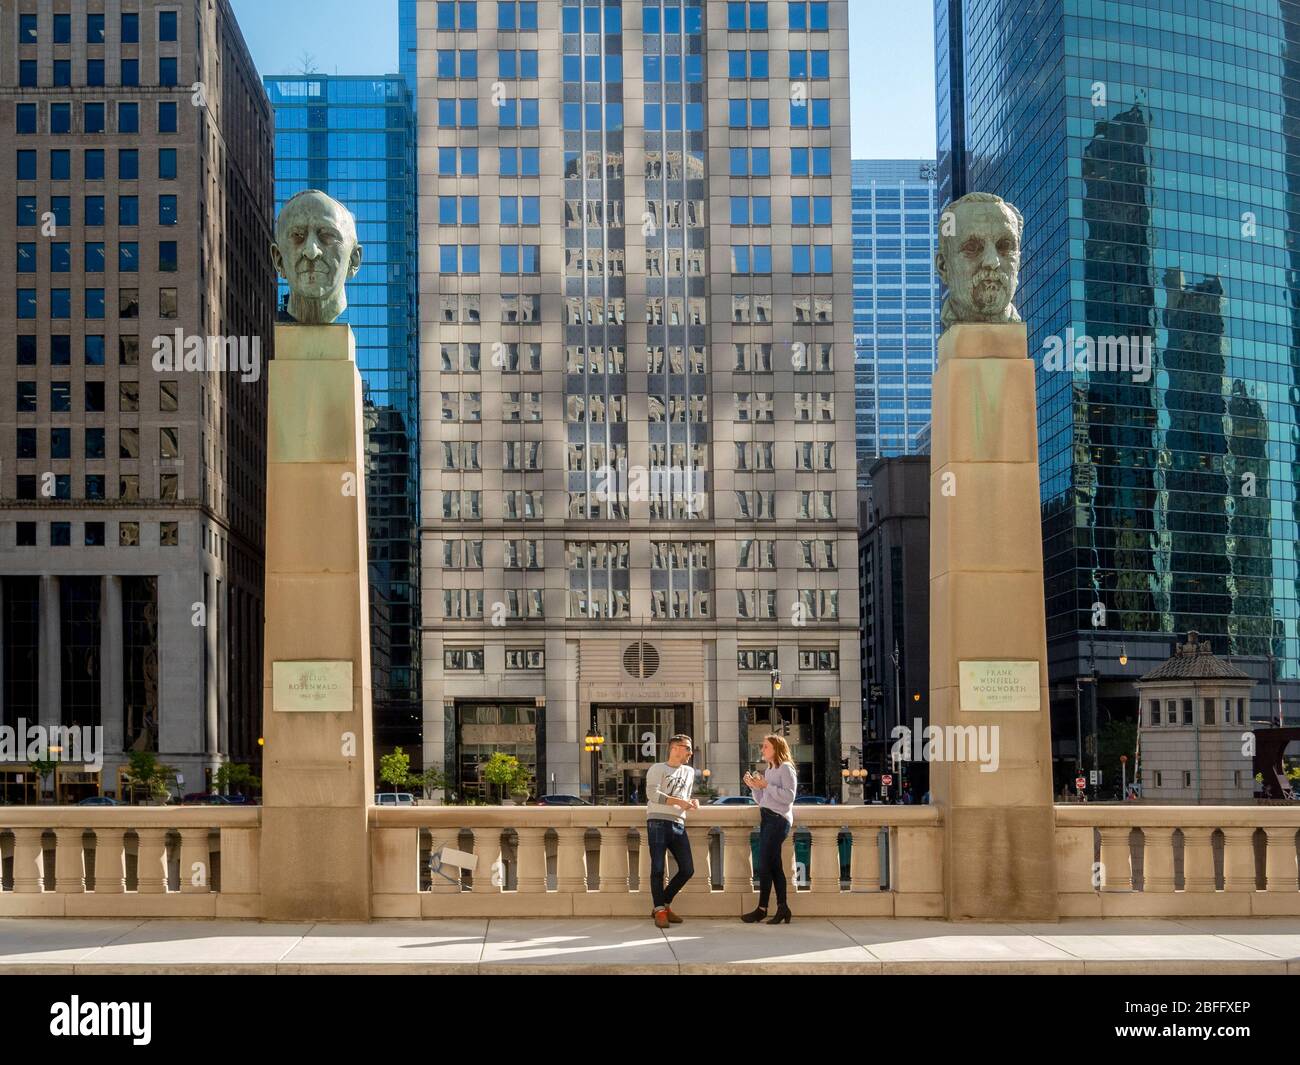 Portrait statues of famous businessmen  Julius Rosenwald and Frank Winfield Woolworth stand on columns before Chicago's Merchandise Mart on the Chicago River. Stock Photo